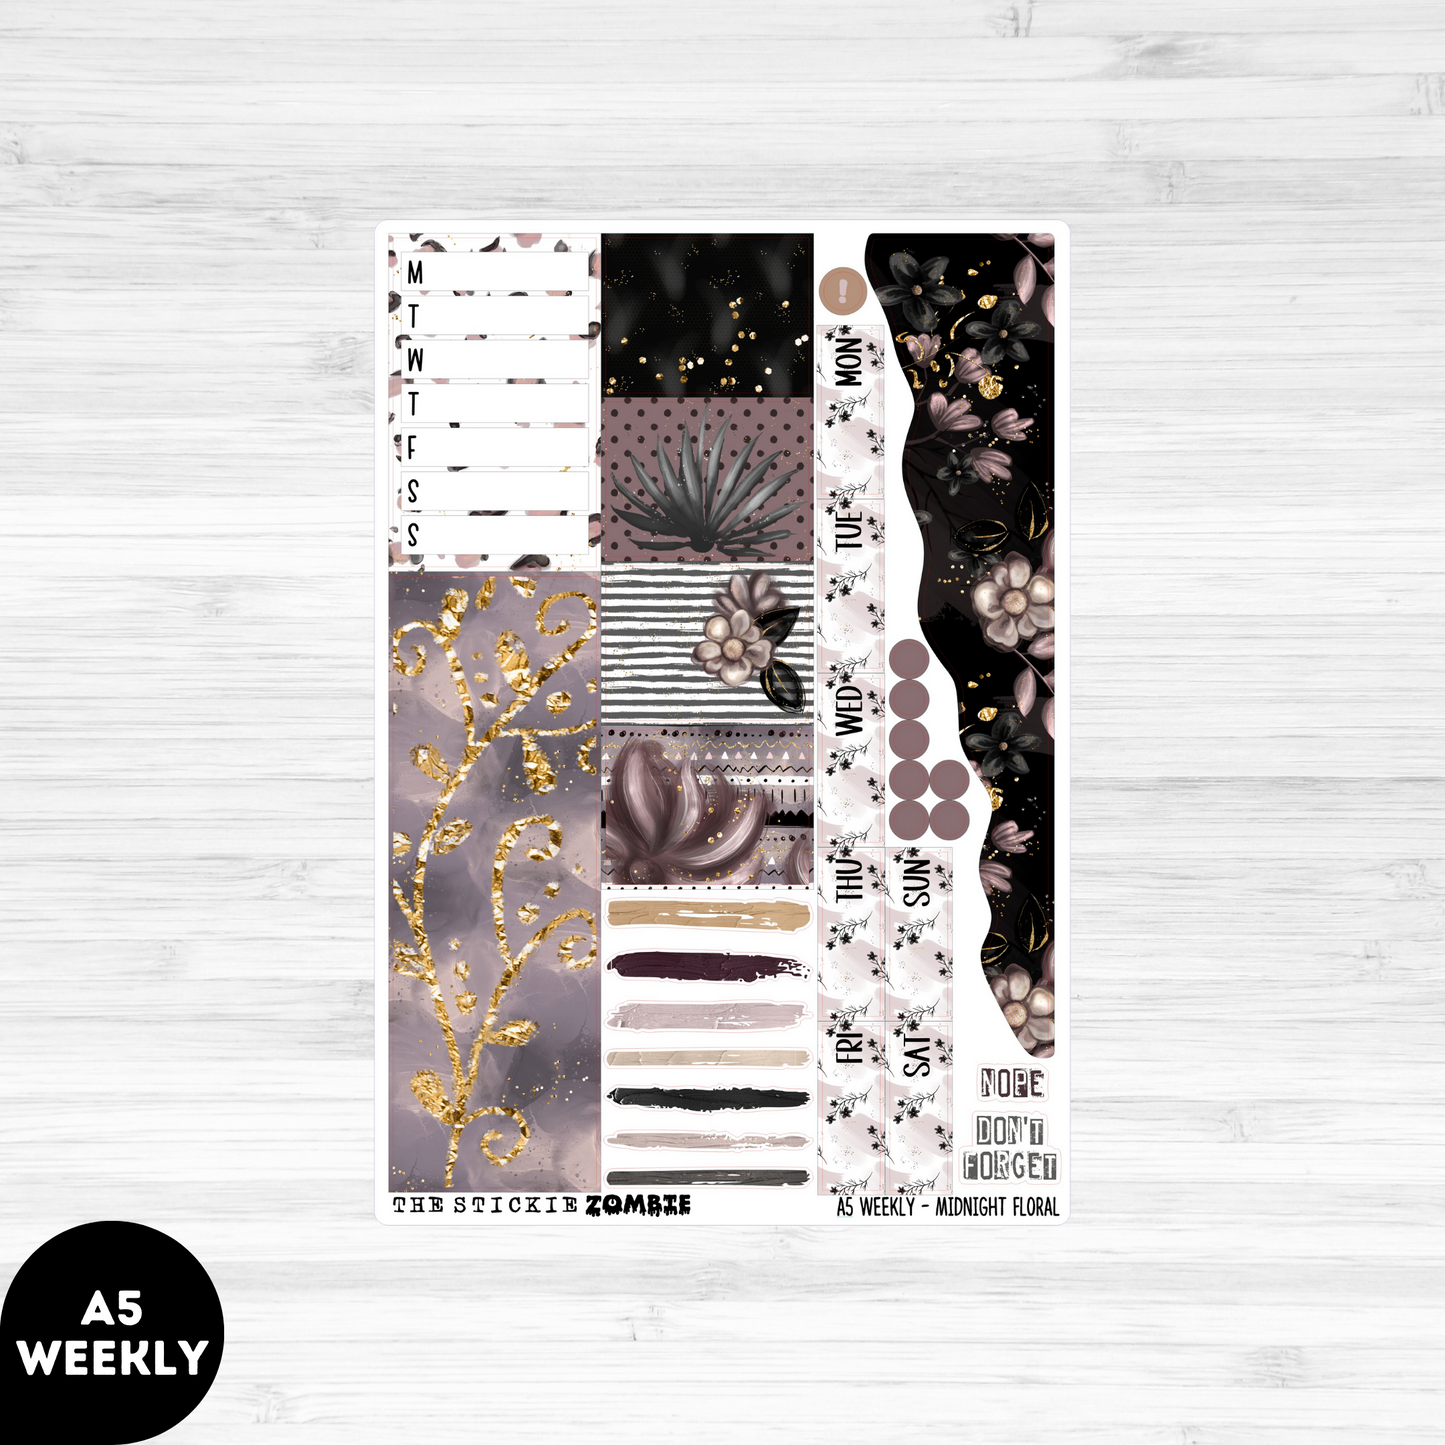 Daily & Weekly Kit / Midnight Floral